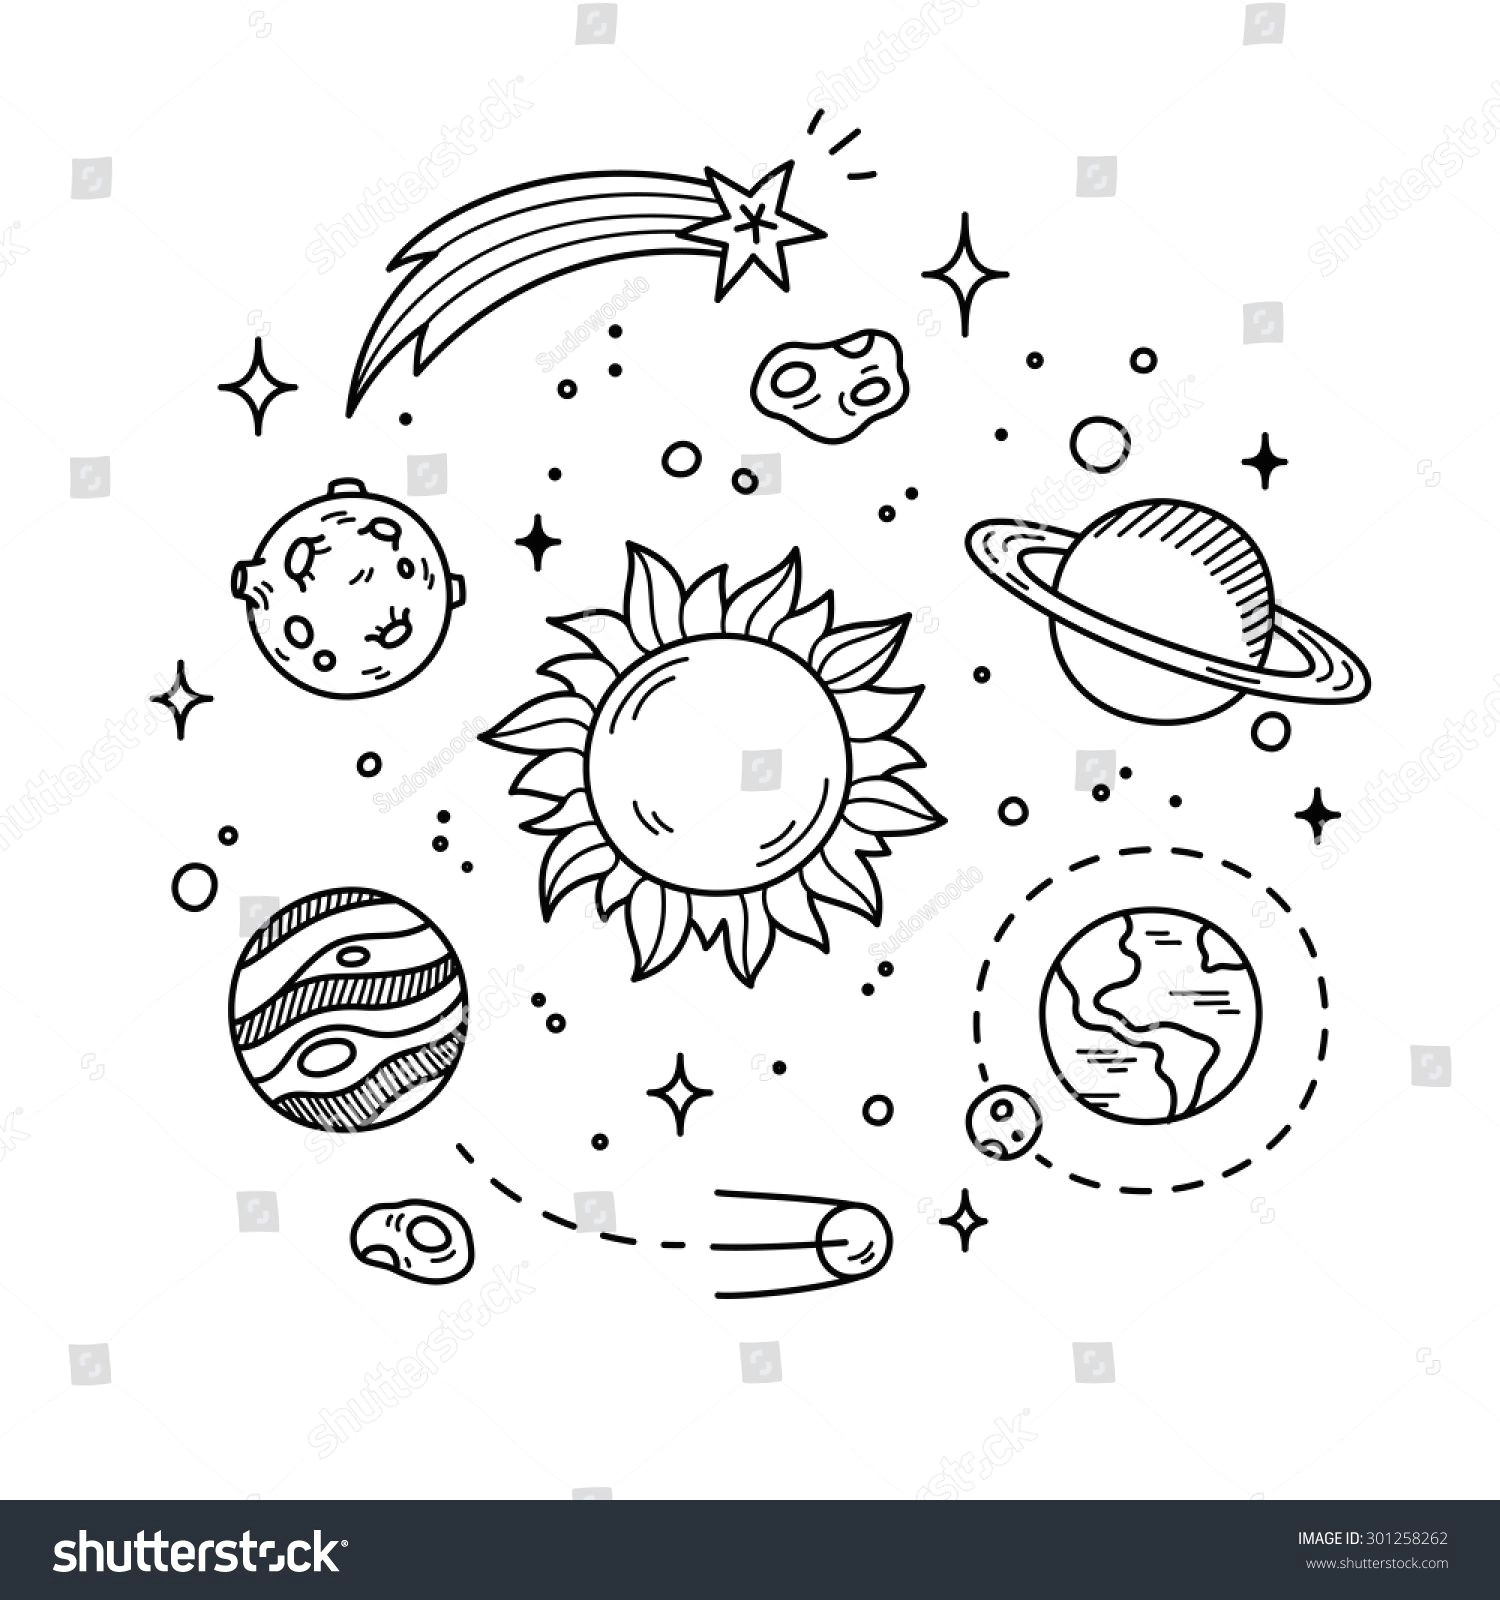 Planets Drawing Easy Hand Drawn solar System with Sun Planets asteroids and